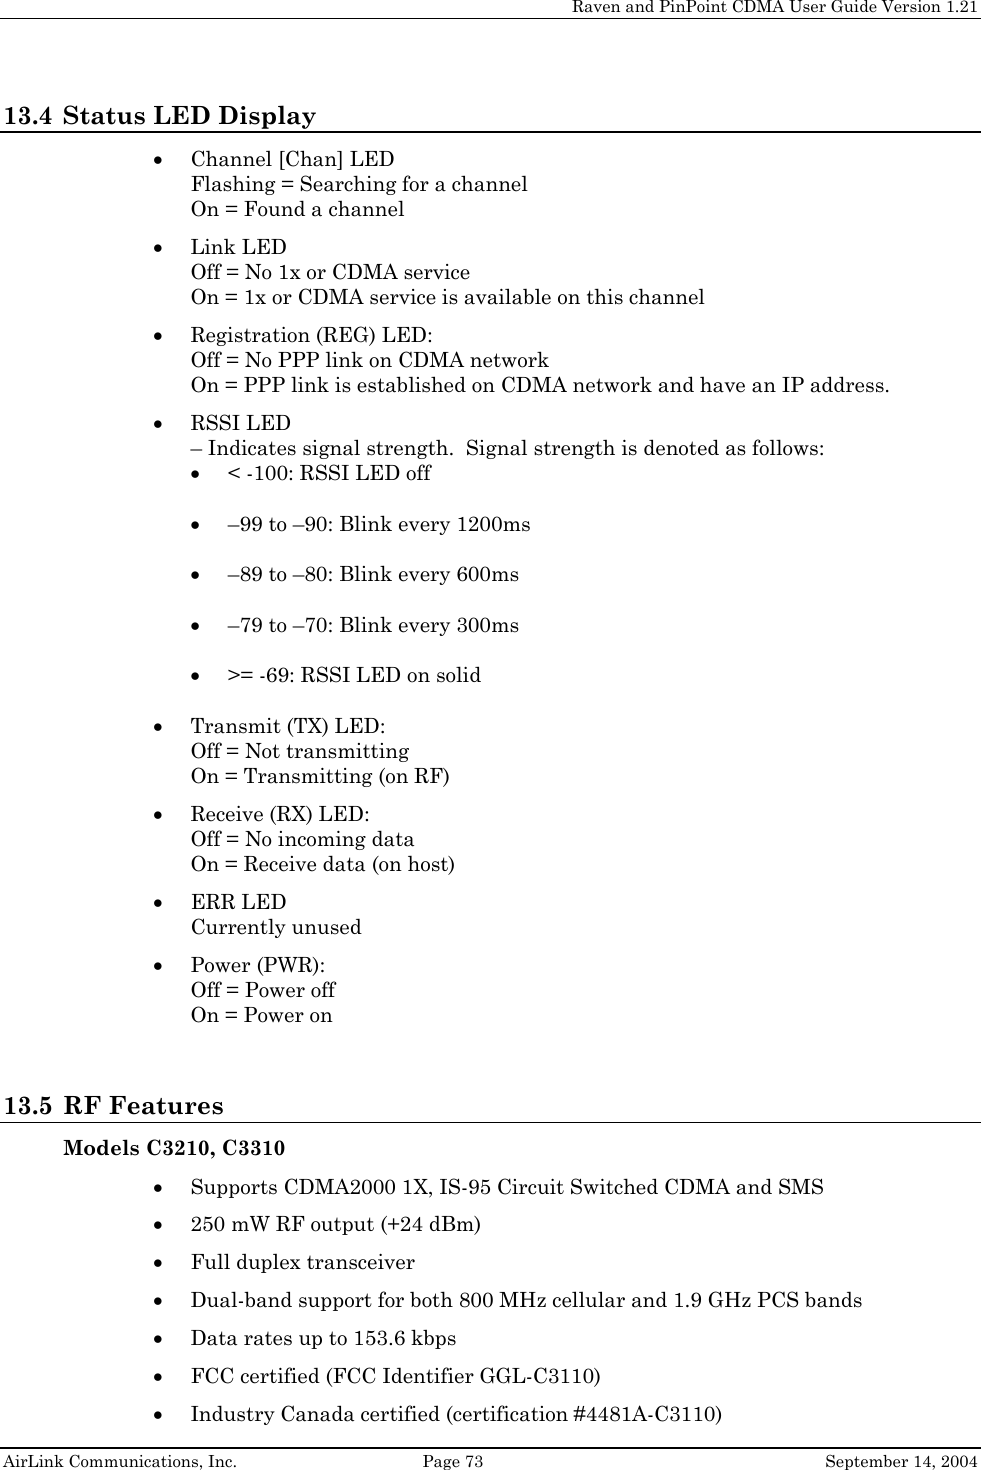     Raven and PinPoint CDMA User Guide Version 1.21  AirLink Communications, Inc.  Page 73  September 14, 2004 13.4 Status LED Display • Channel [Chan] LED Flashing = Searching for a channel On = Found a channel • Link LED Off = No 1x or CDMA service On = 1x or CDMA service is available on this channel • Registration (REG) LED: Off = No PPP link on CDMA network On = PPP link is established on CDMA network and have an IP address. • RSSI LED – Indicates signal strength.  Signal strength is denoted as follows: • &lt; -100: RSSI LED off • –99 to –90: Blink every 1200ms • –89 to –80: Blink every 600ms • –79 to –70: Blink every 300ms • &gt;= -69: RSSI LED on solid • Transmit (TX) LED: Off = Not transmitting On = Transmitting (on RF) • Receive (RX) LED: Off = No incoming data On = Receive data (on host) • ERR LED Currently unused • Power (PWR): Off = Power off On = Power on  13.5 RF Features Models C3210, C3310 • Supports CDMA2000 1X, IS-95 Circuit Switched CDMA and SMS • 250 mW RF output (+24 dBm) • Full duplex transceiver • Dual-band support for both 800 MHz cellular and 1.9 GHz PCS bands • Data rates up to 153.6 kbps • FCC certified (FCC Identifier GGL-C3110) • Industry Canada certified (certification #4481A-C3110) 